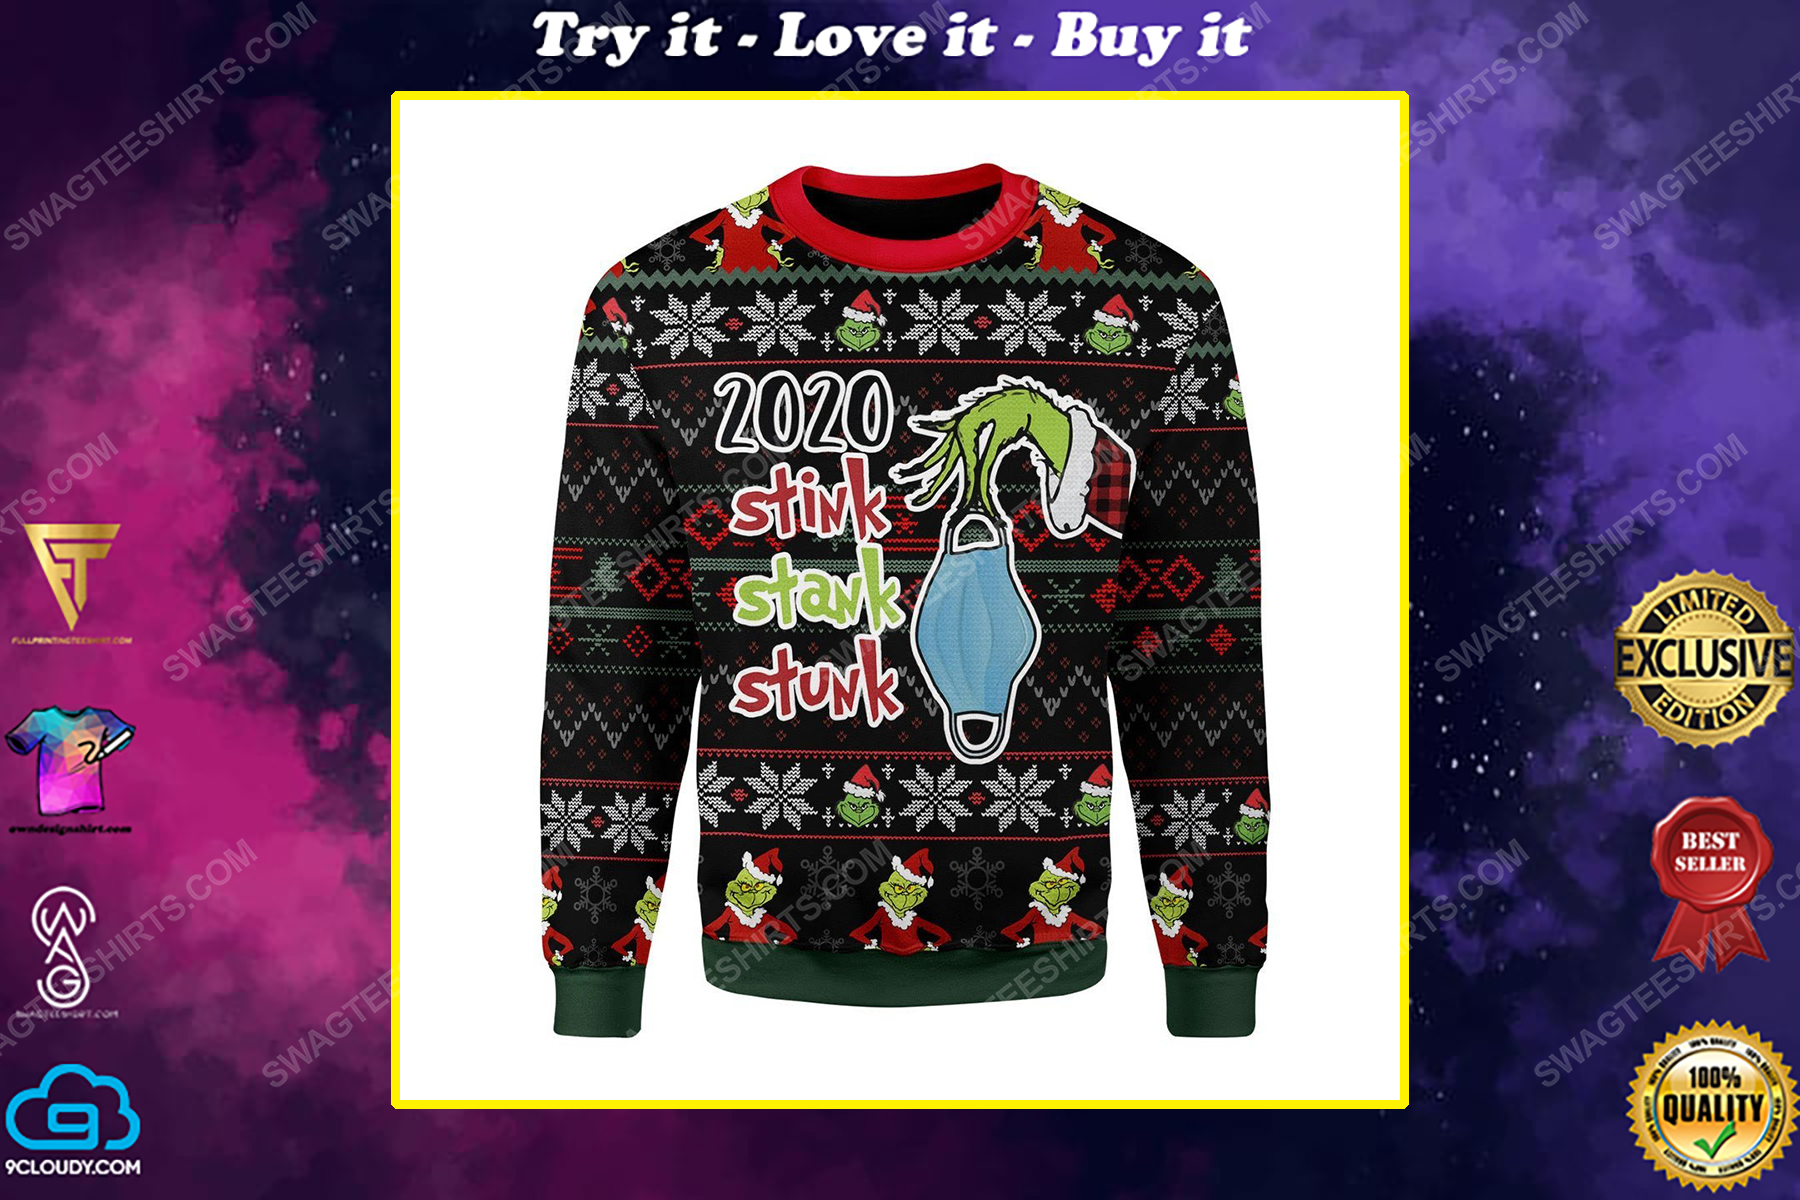 Grinch hand with mask stink stank stunk ugly christmas sweater